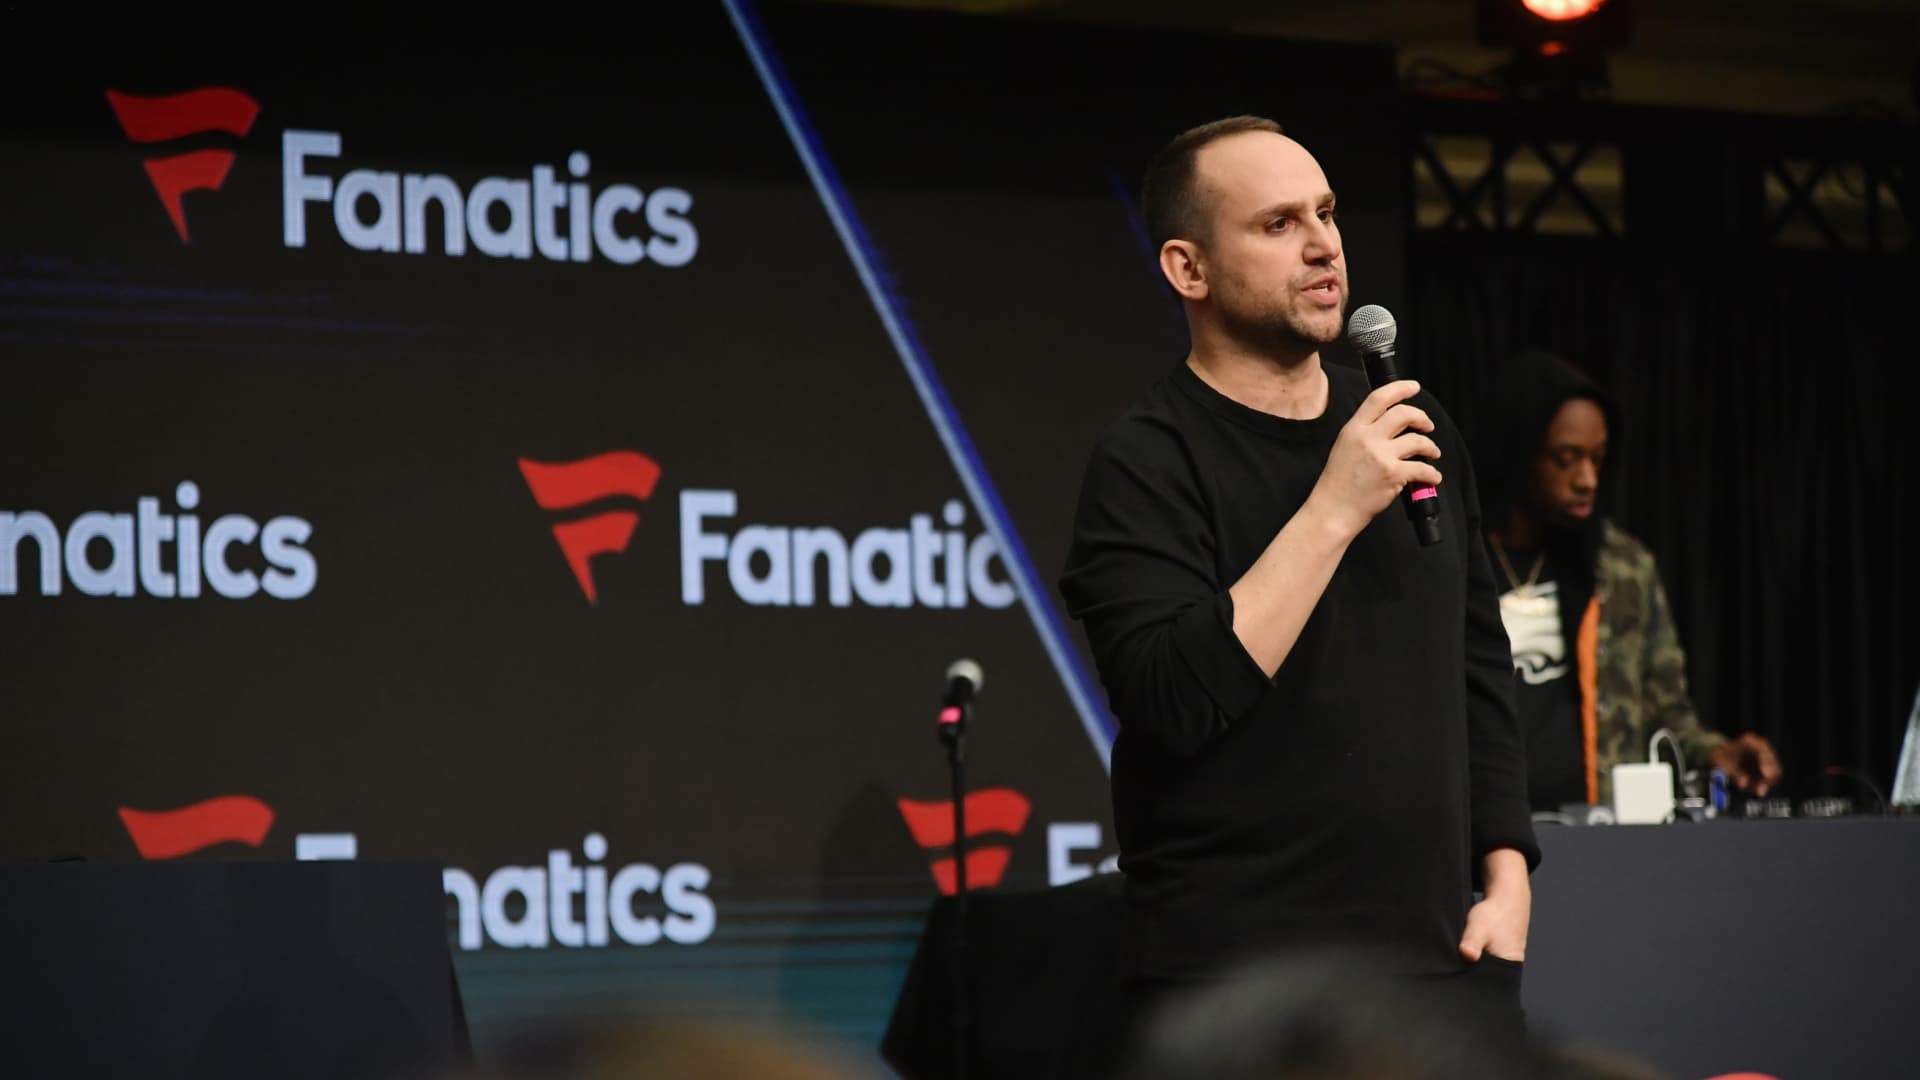 Fanatics wants to be a $100 billion company – here’s how it plans to get there